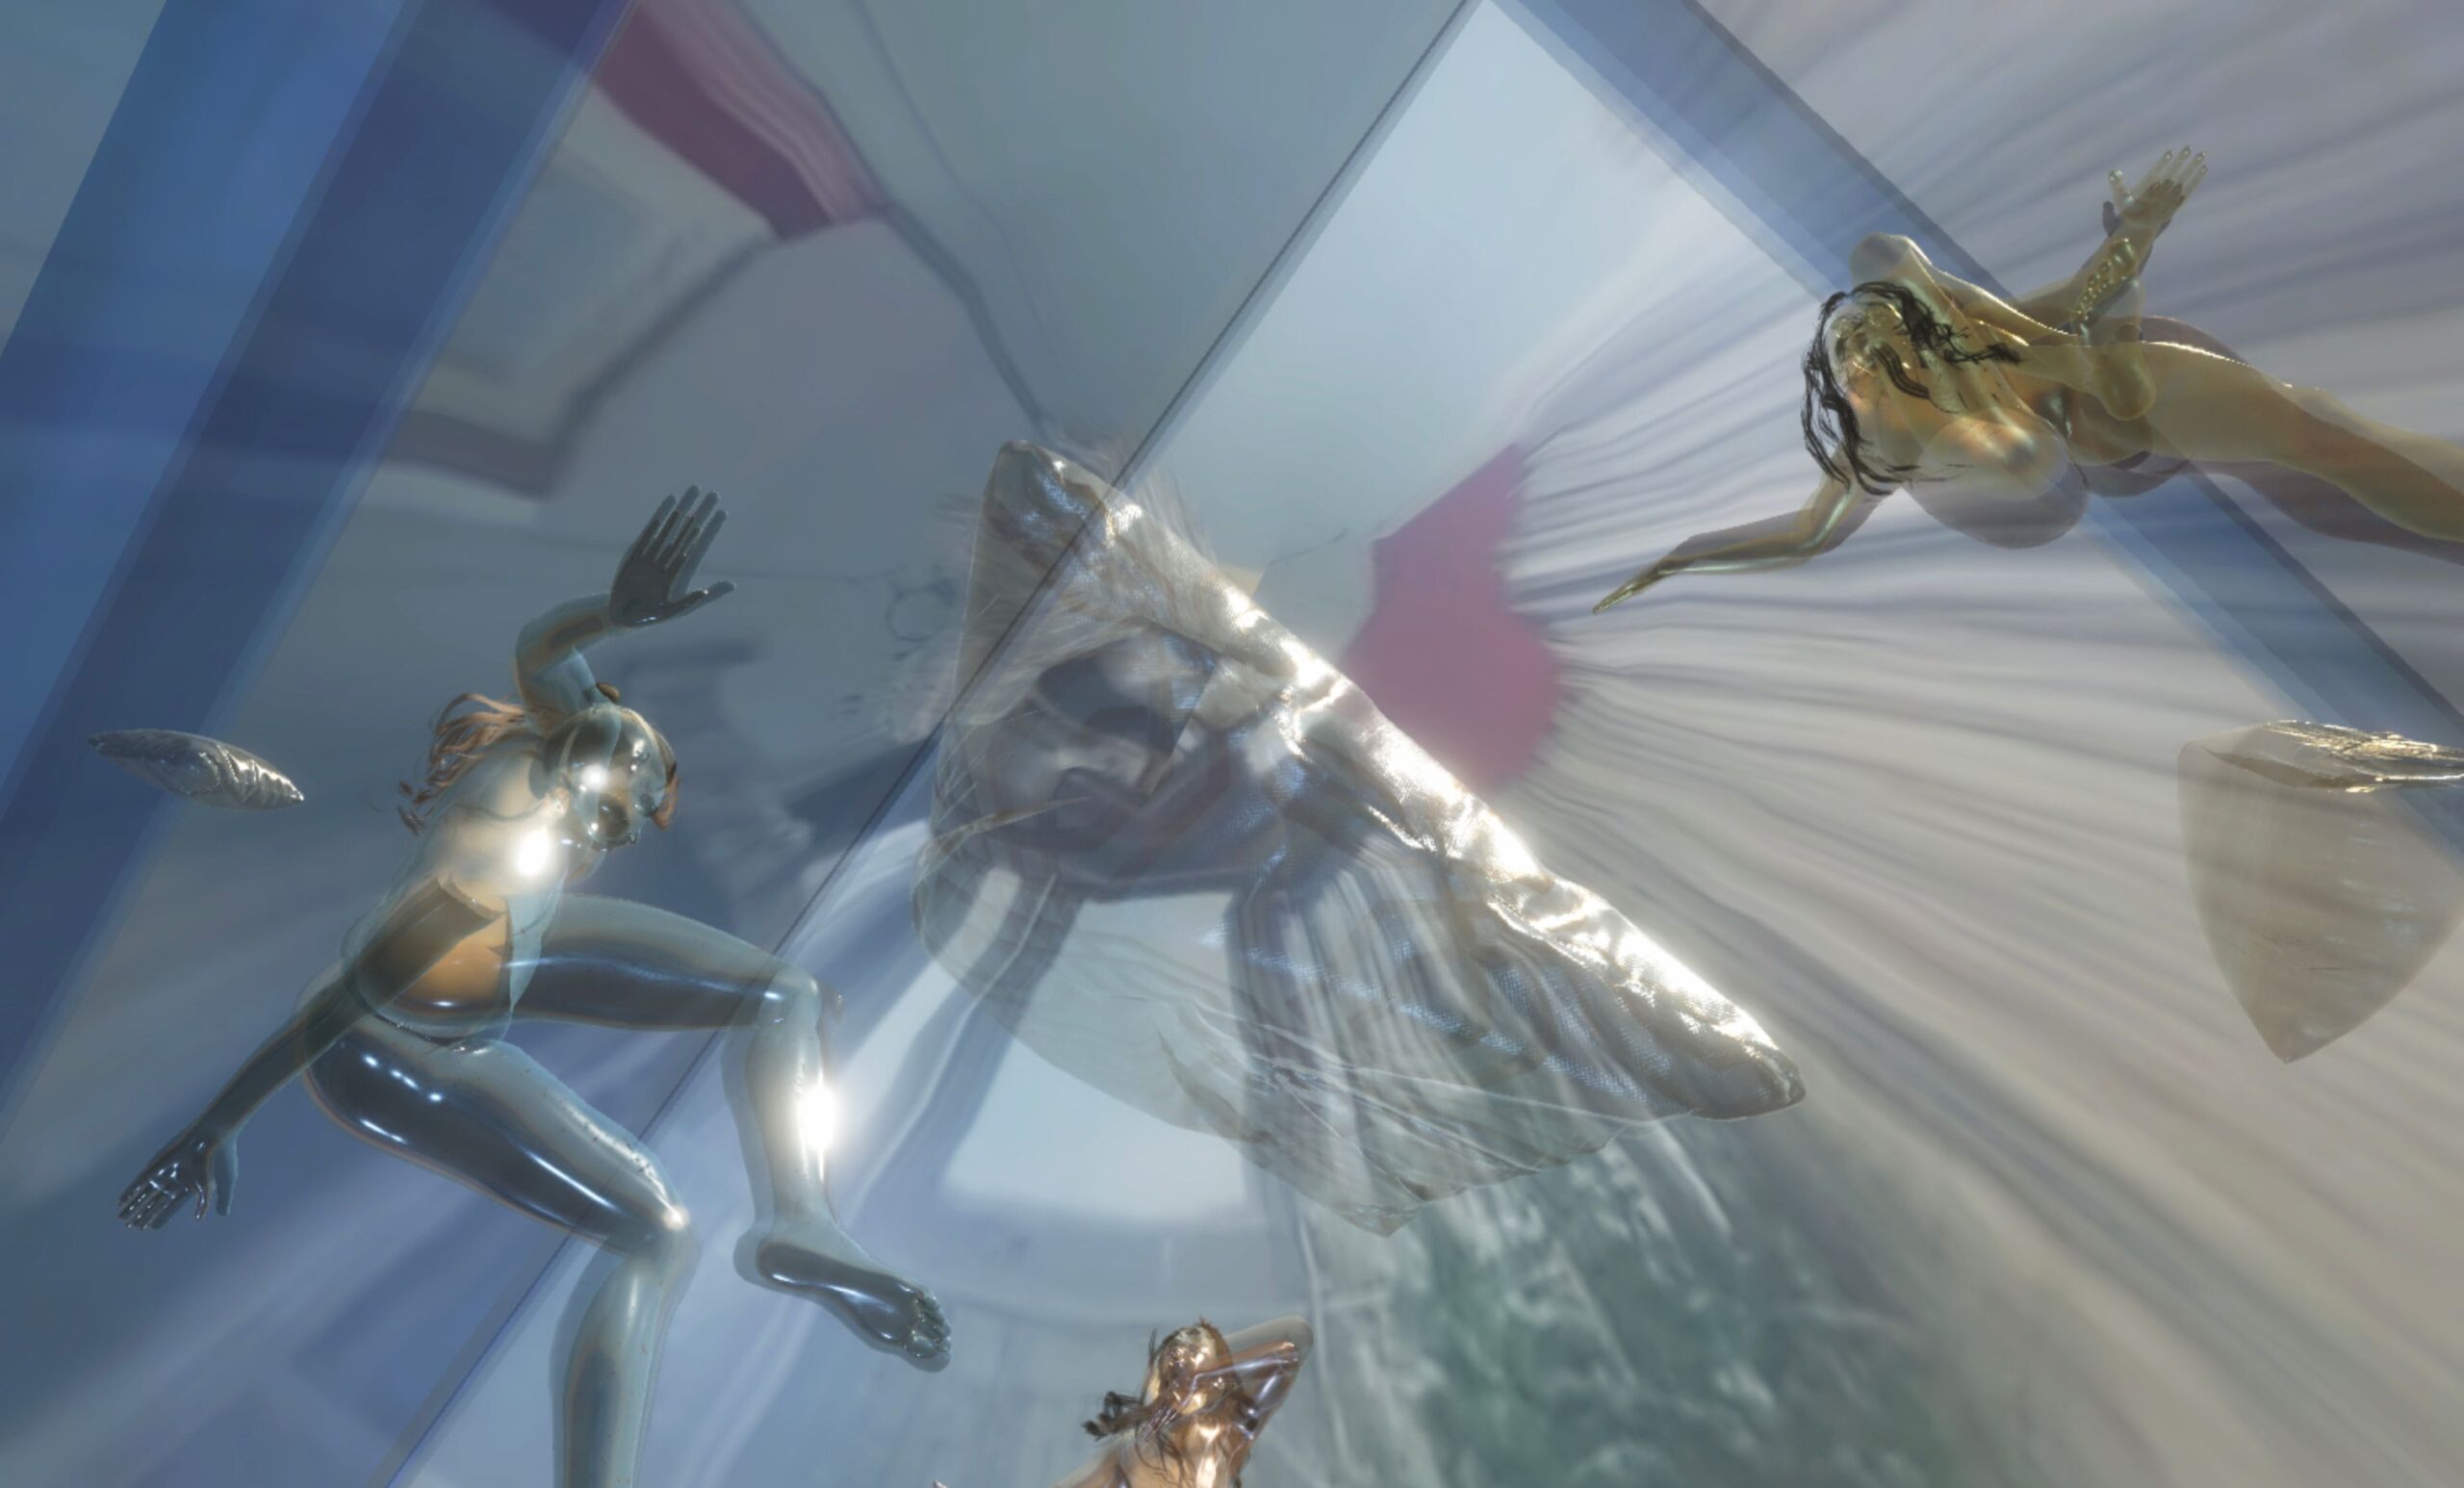 Animated image of a two shiny, naked figures. The viewer is positioned below the subjects, looking up through a translucent screen.